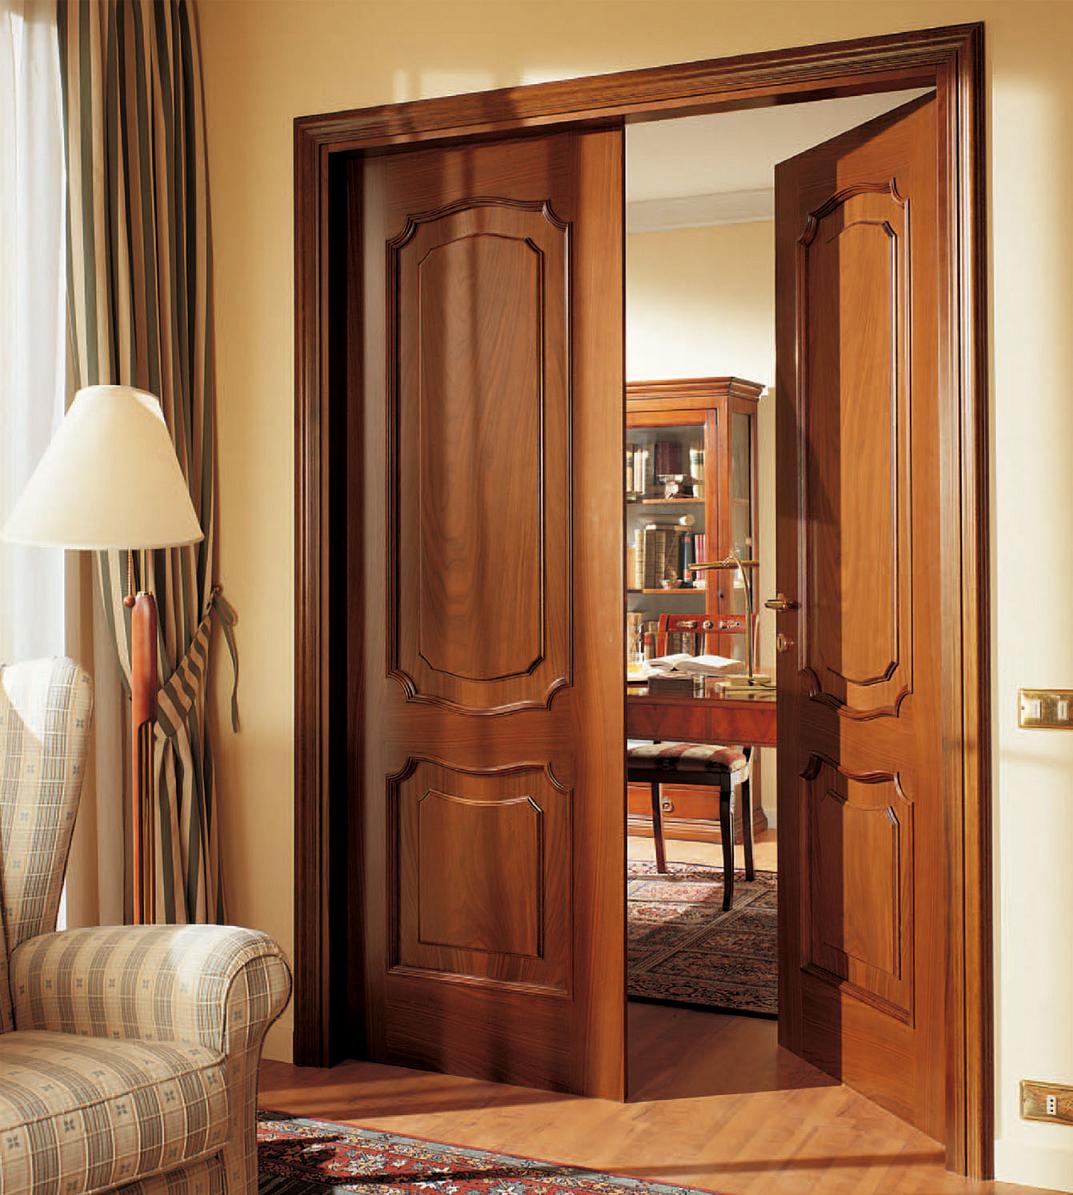 Entrance With Matched Fascinating Entrance With Wooden Flooring Matched With Interior Wood Doors Furnished With Flooring Stand Lamp And Completed With Tie Back Room Curtains Interior Design The Possible Combination Of The Interior Wood Doors